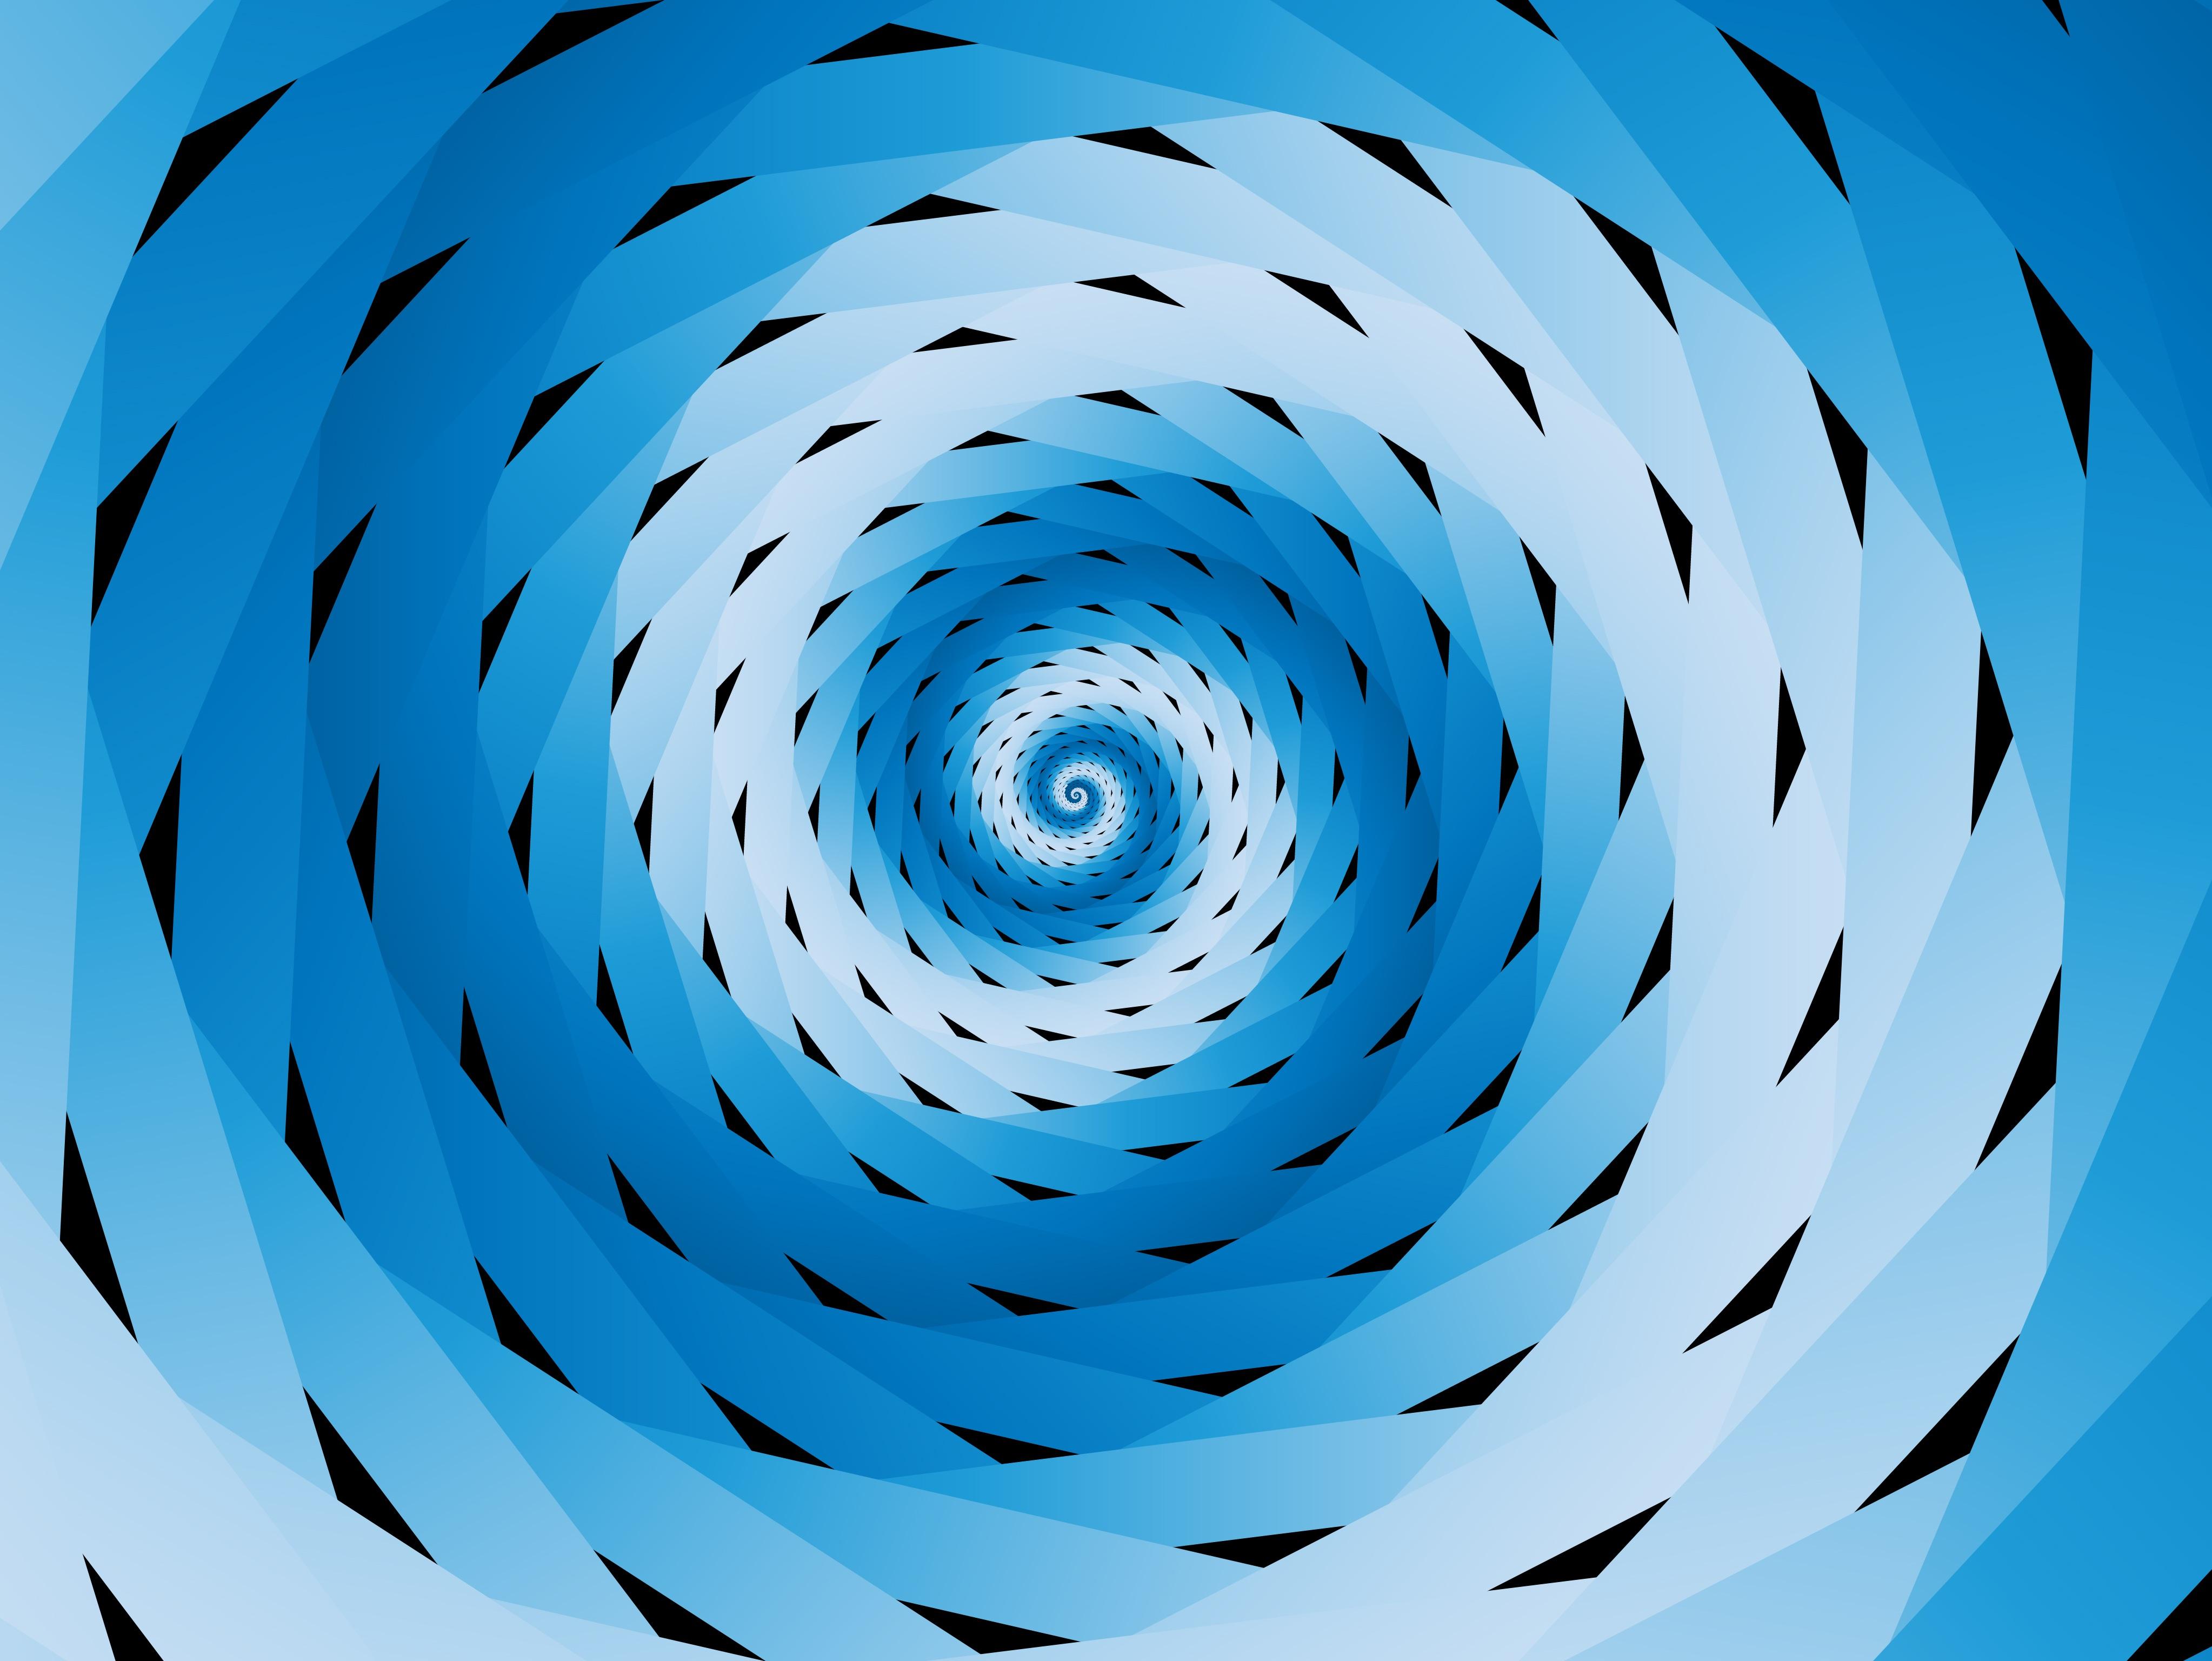 Hypnotic Spiral Blue 4k Wallpaper and Free